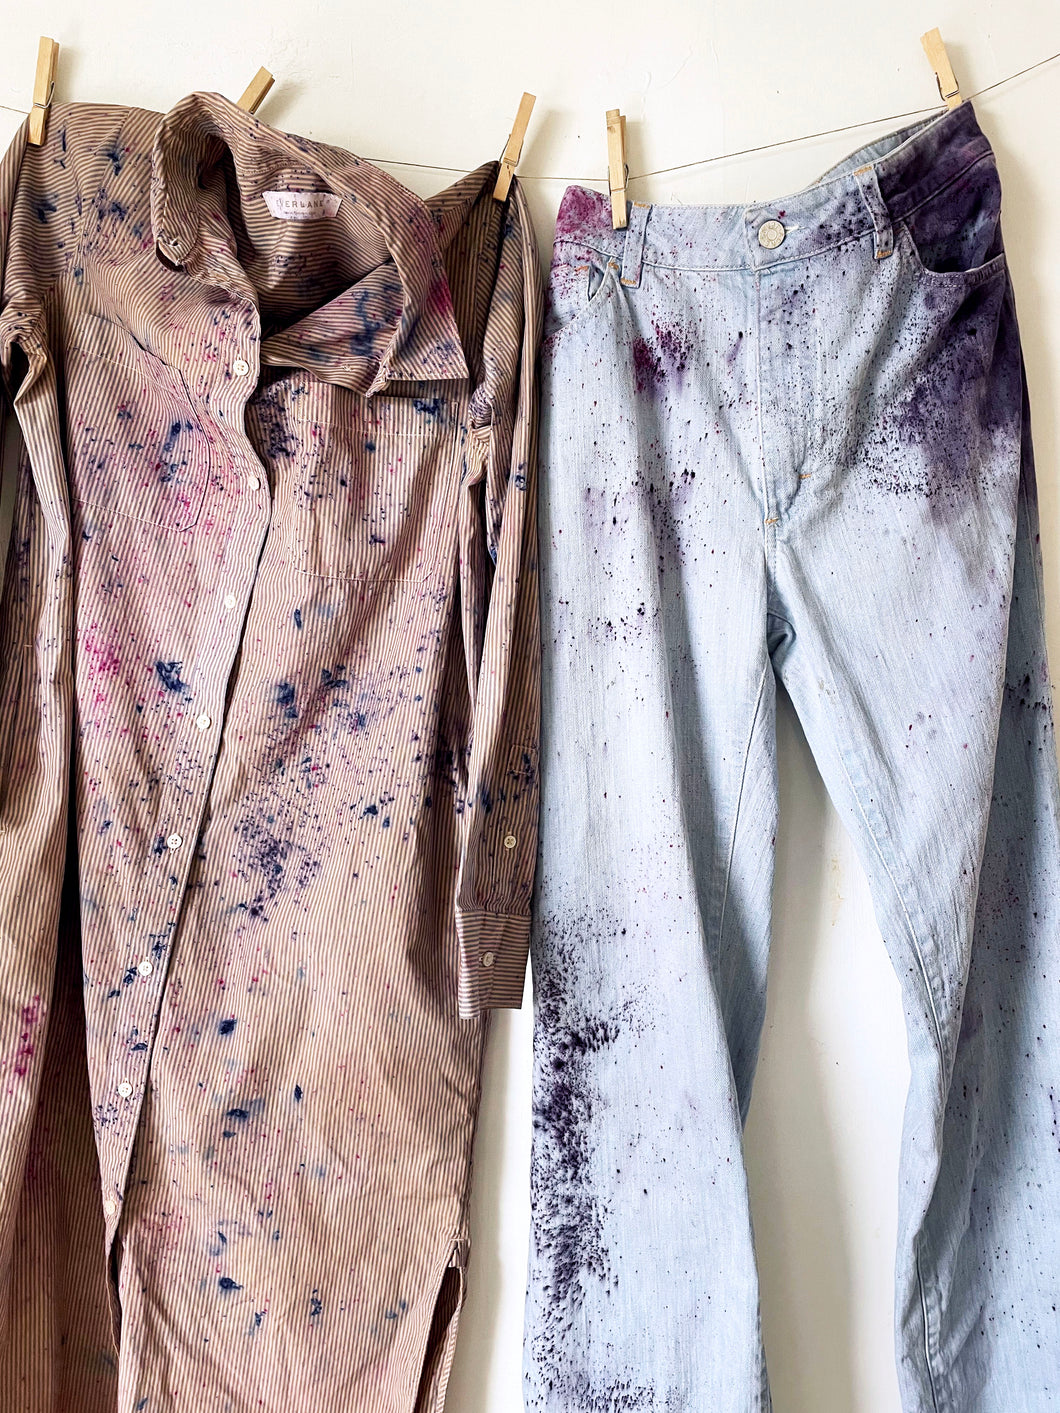 custom bundle dye (send me your old + stained clothes/bedding!)